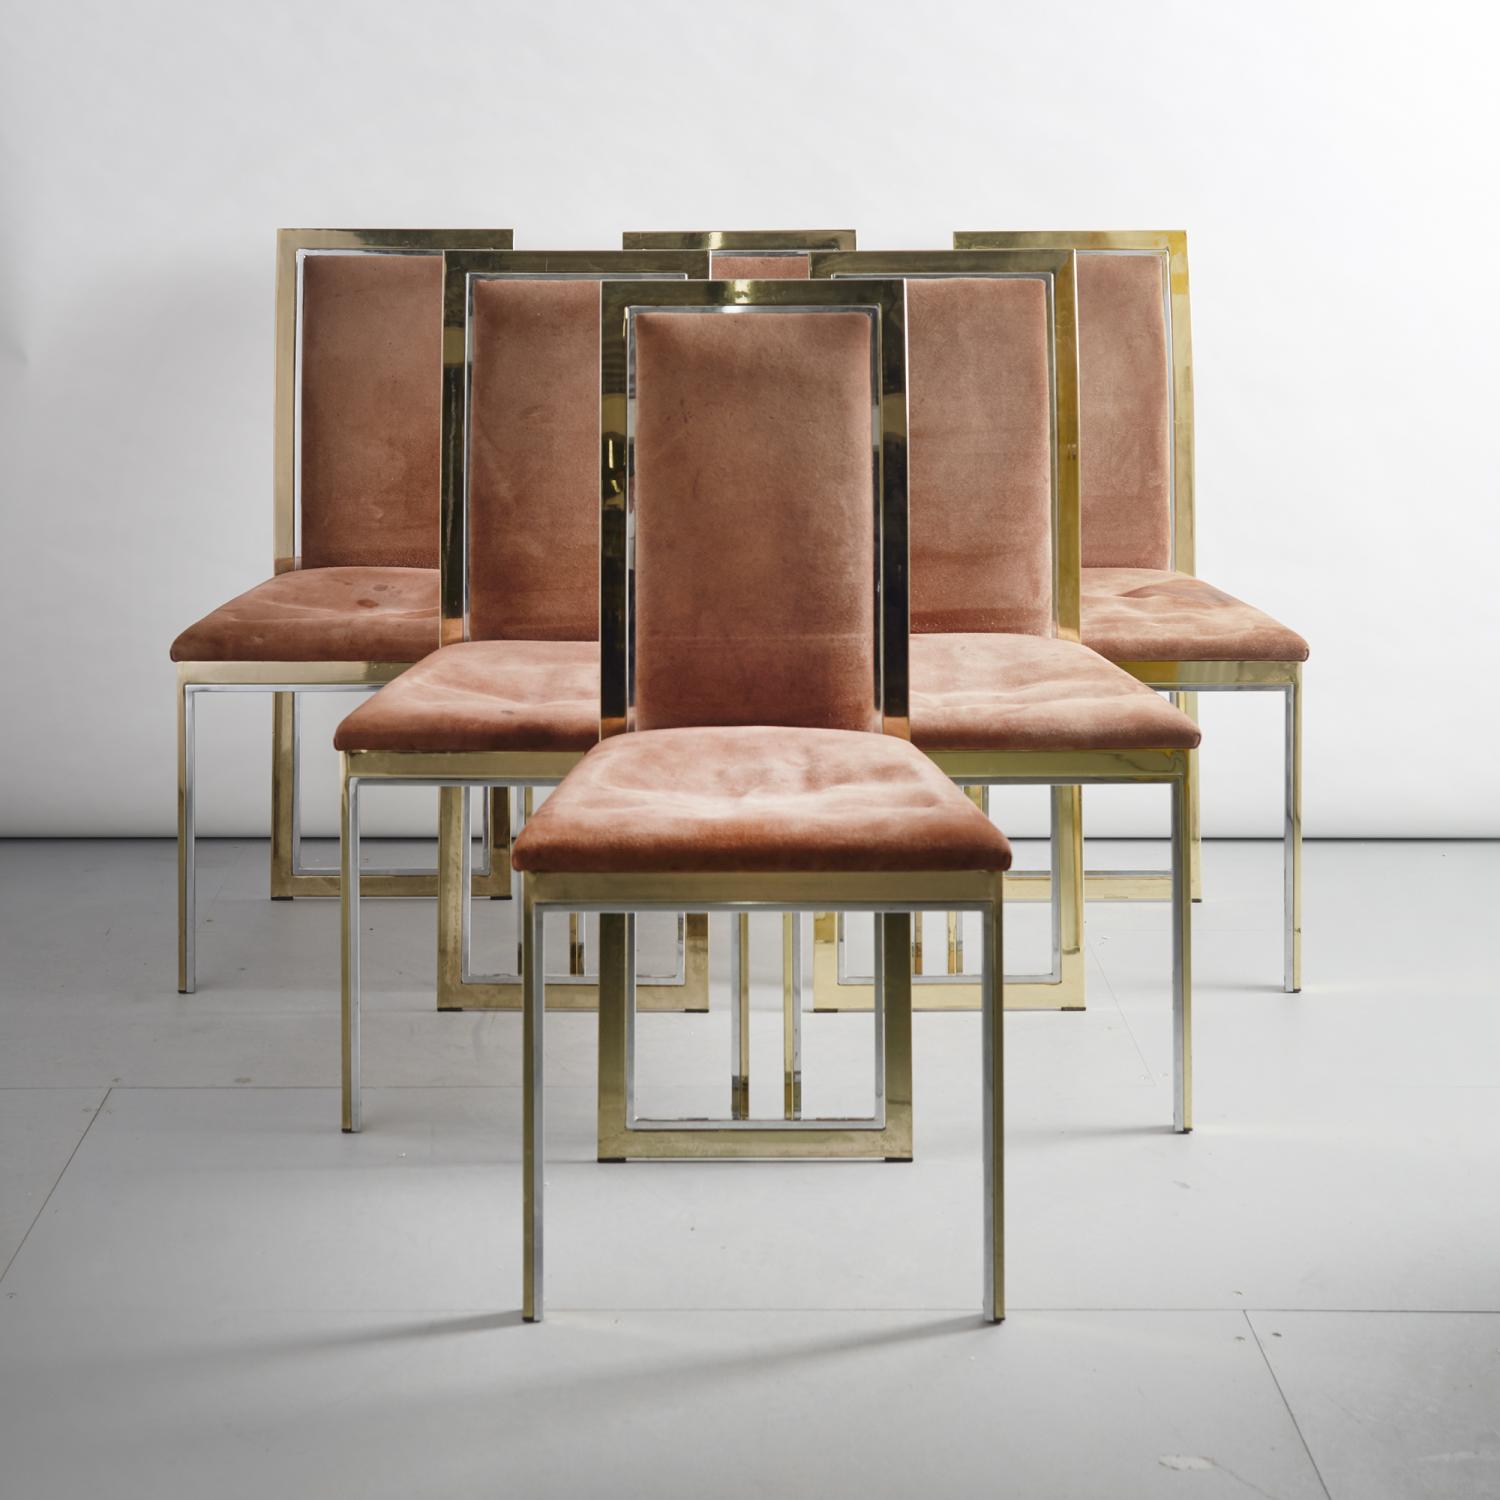 Six brass and chrome chairs